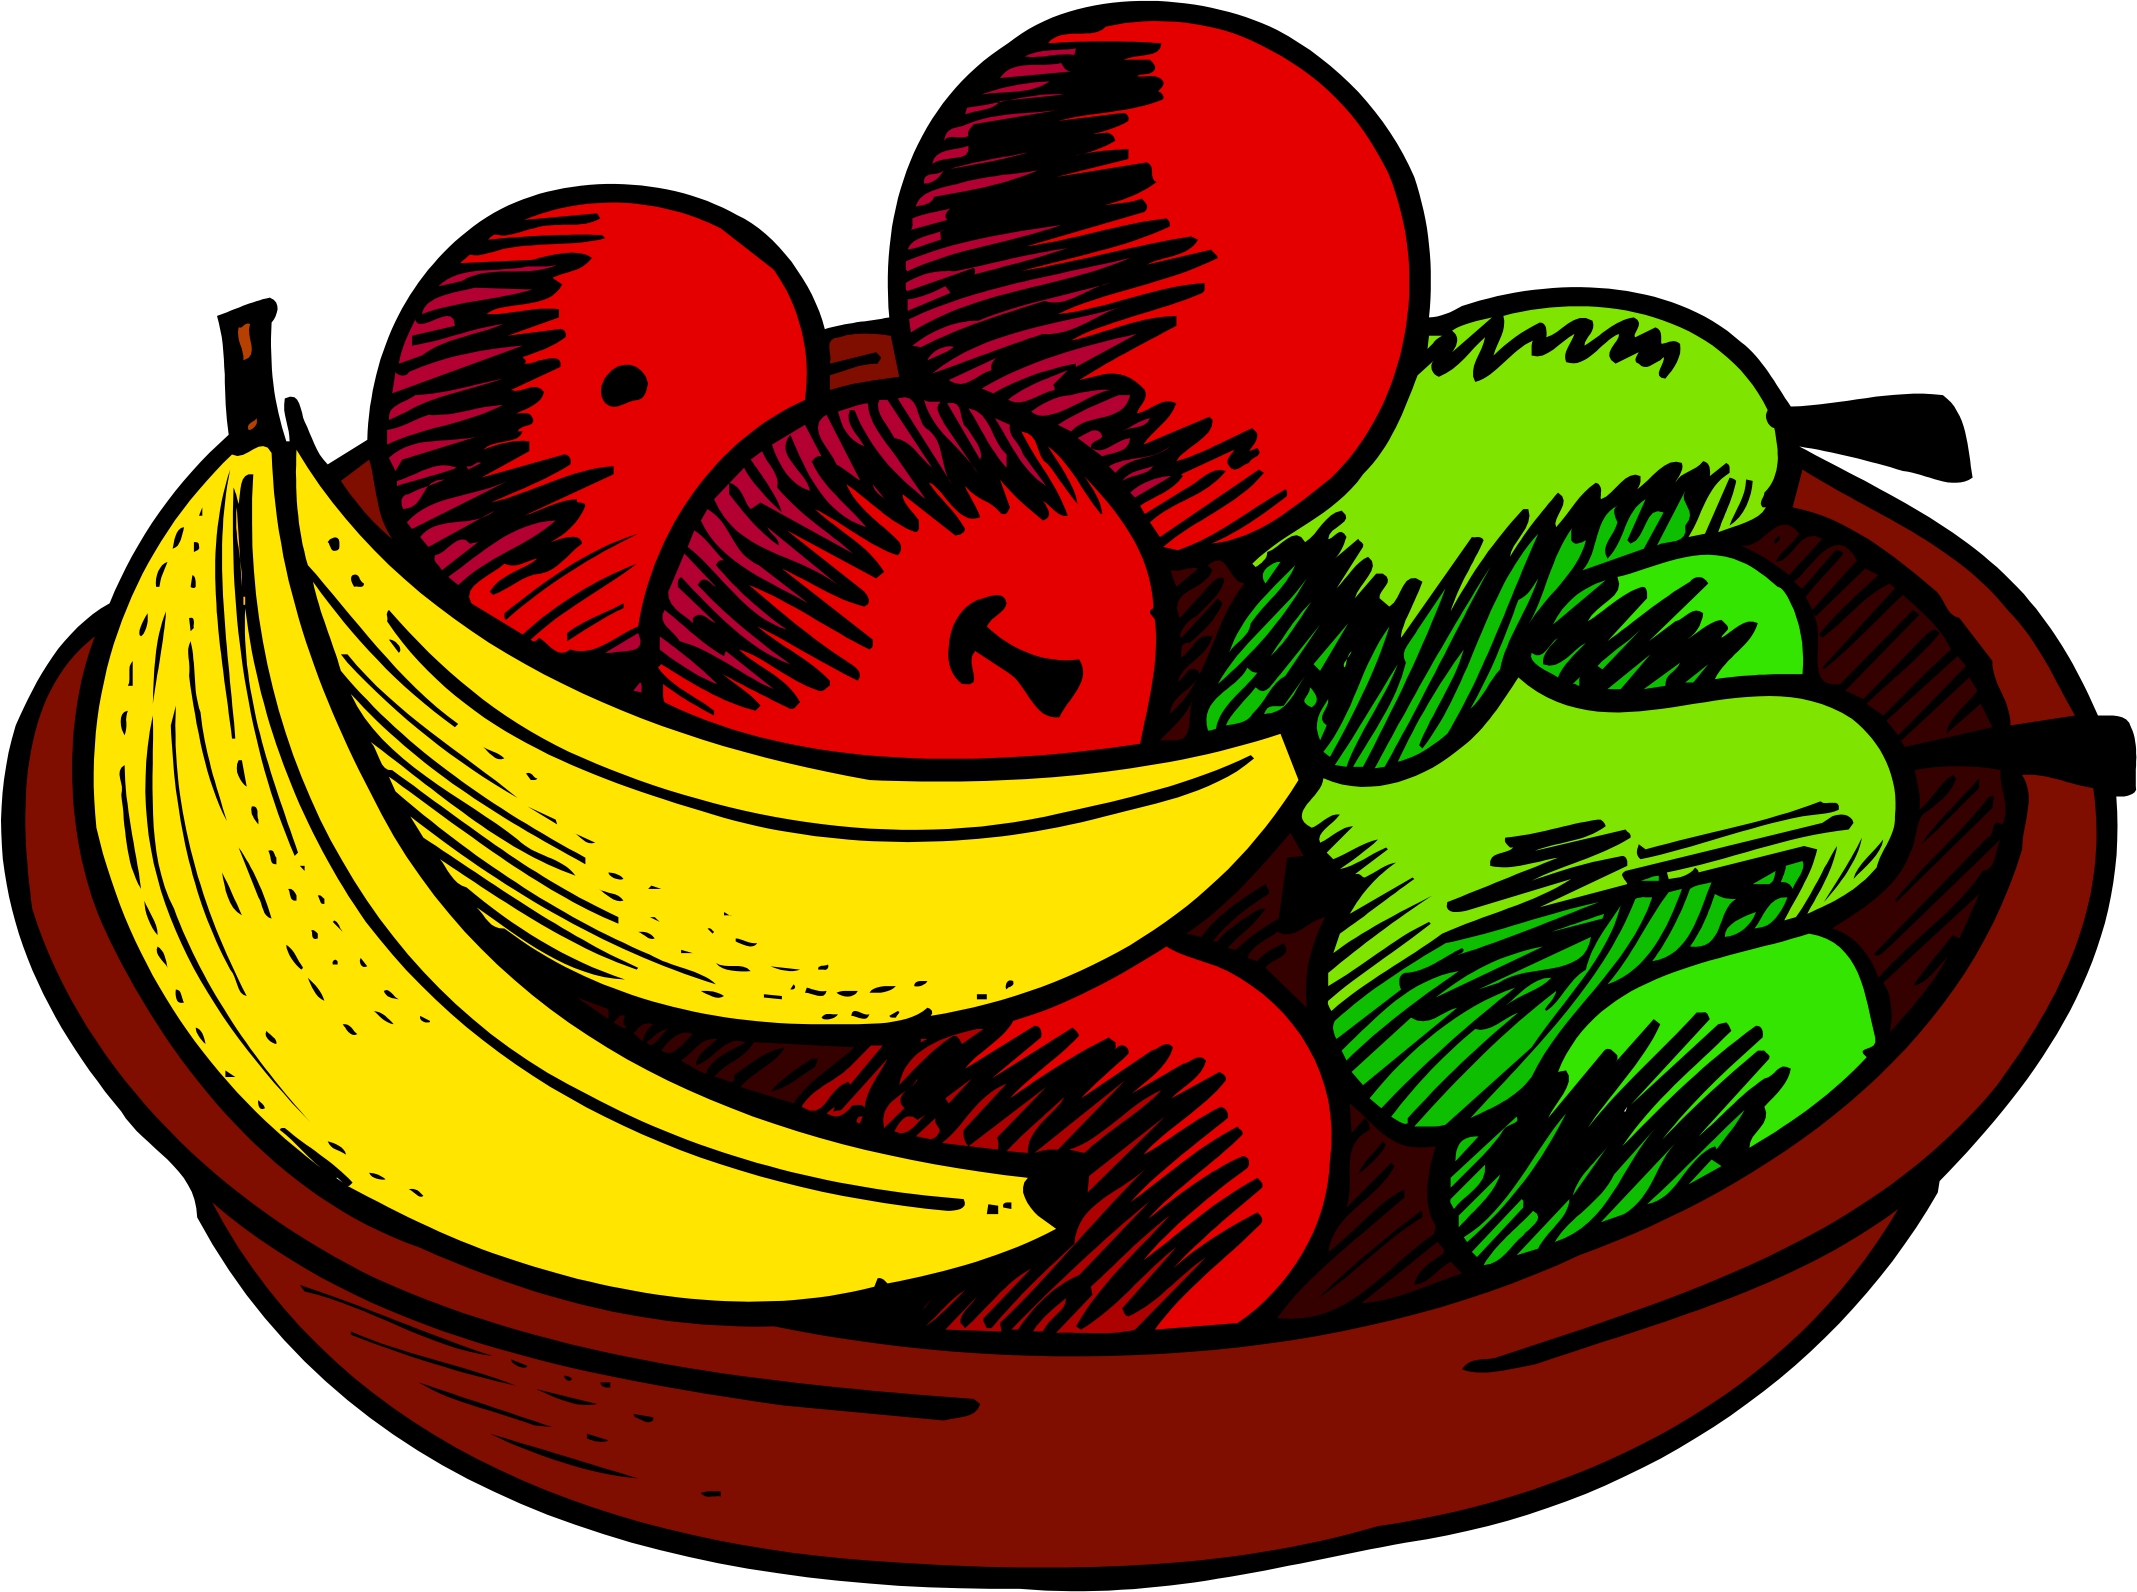 Fruit Bowl Clip Art Images & Pictures - Becuo